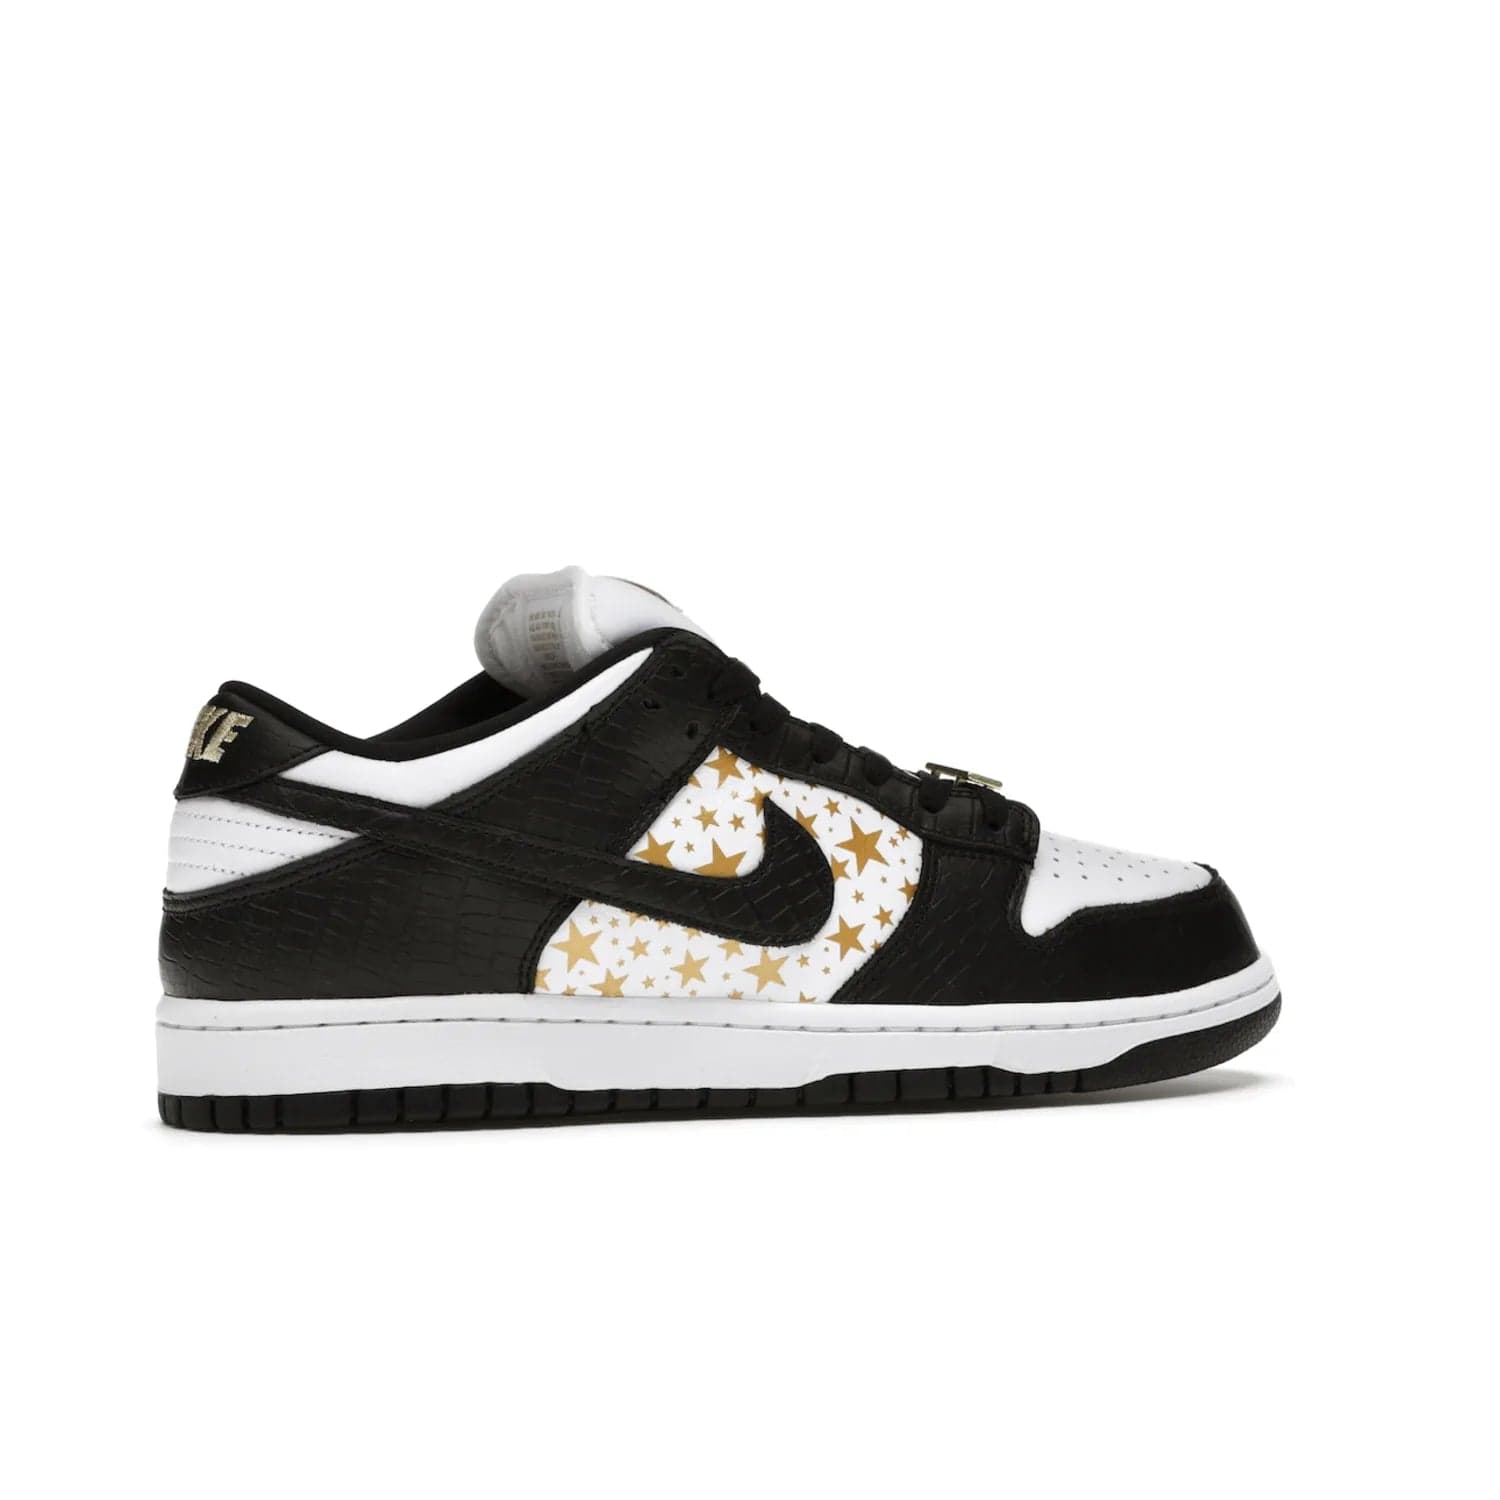 Nike SB Dunk Low Supreme Stars Black (2021) - Image 35 - Only at www.BallersClubKickz.com - Retro style and signature details make the Nike SB Dunk Low Supreme Black a must-have. This special edition shoe features a white leather upper and black croc skin overlays complemented by gold stars and deubré. Enjoy a piece of SB history and grab yours today.